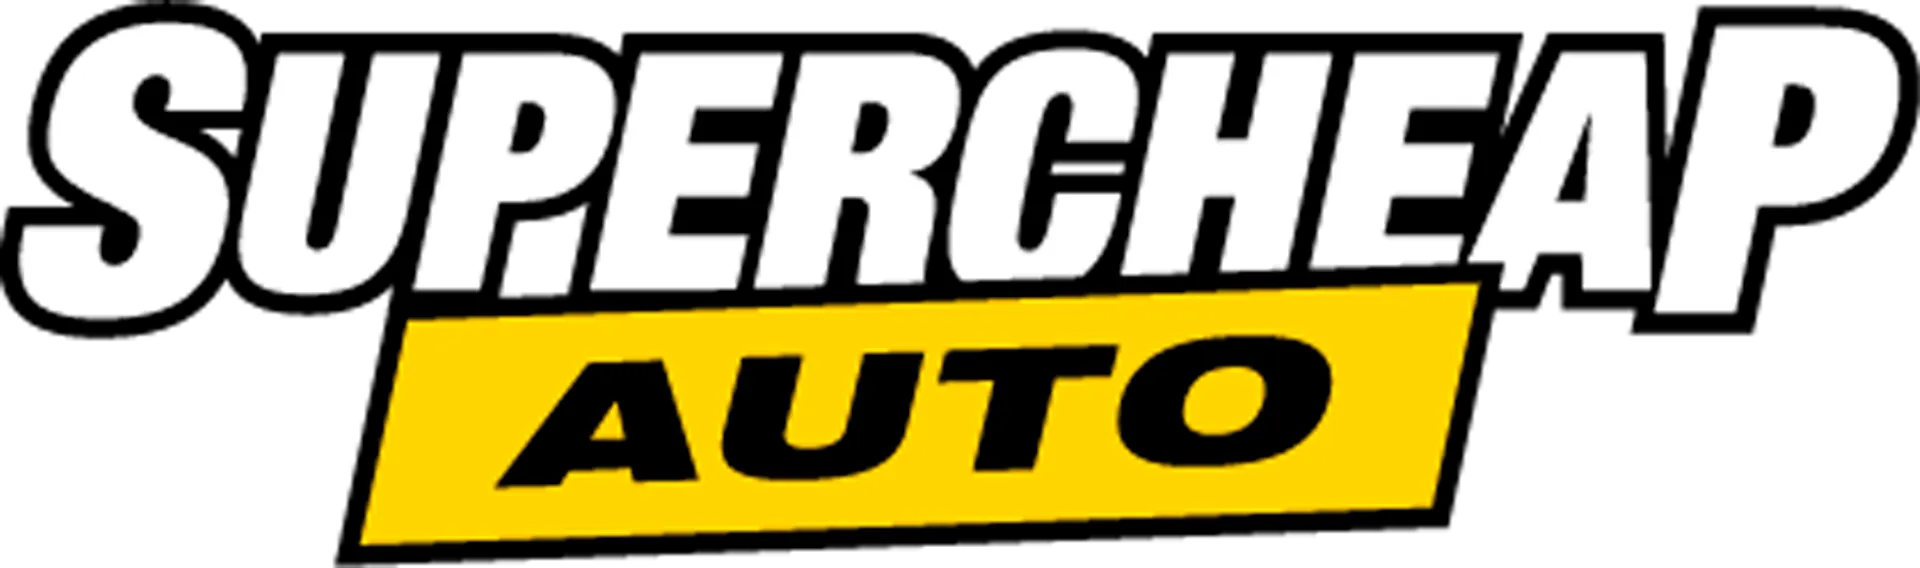 SUPERCHEAP AUTO logo current weekly ad